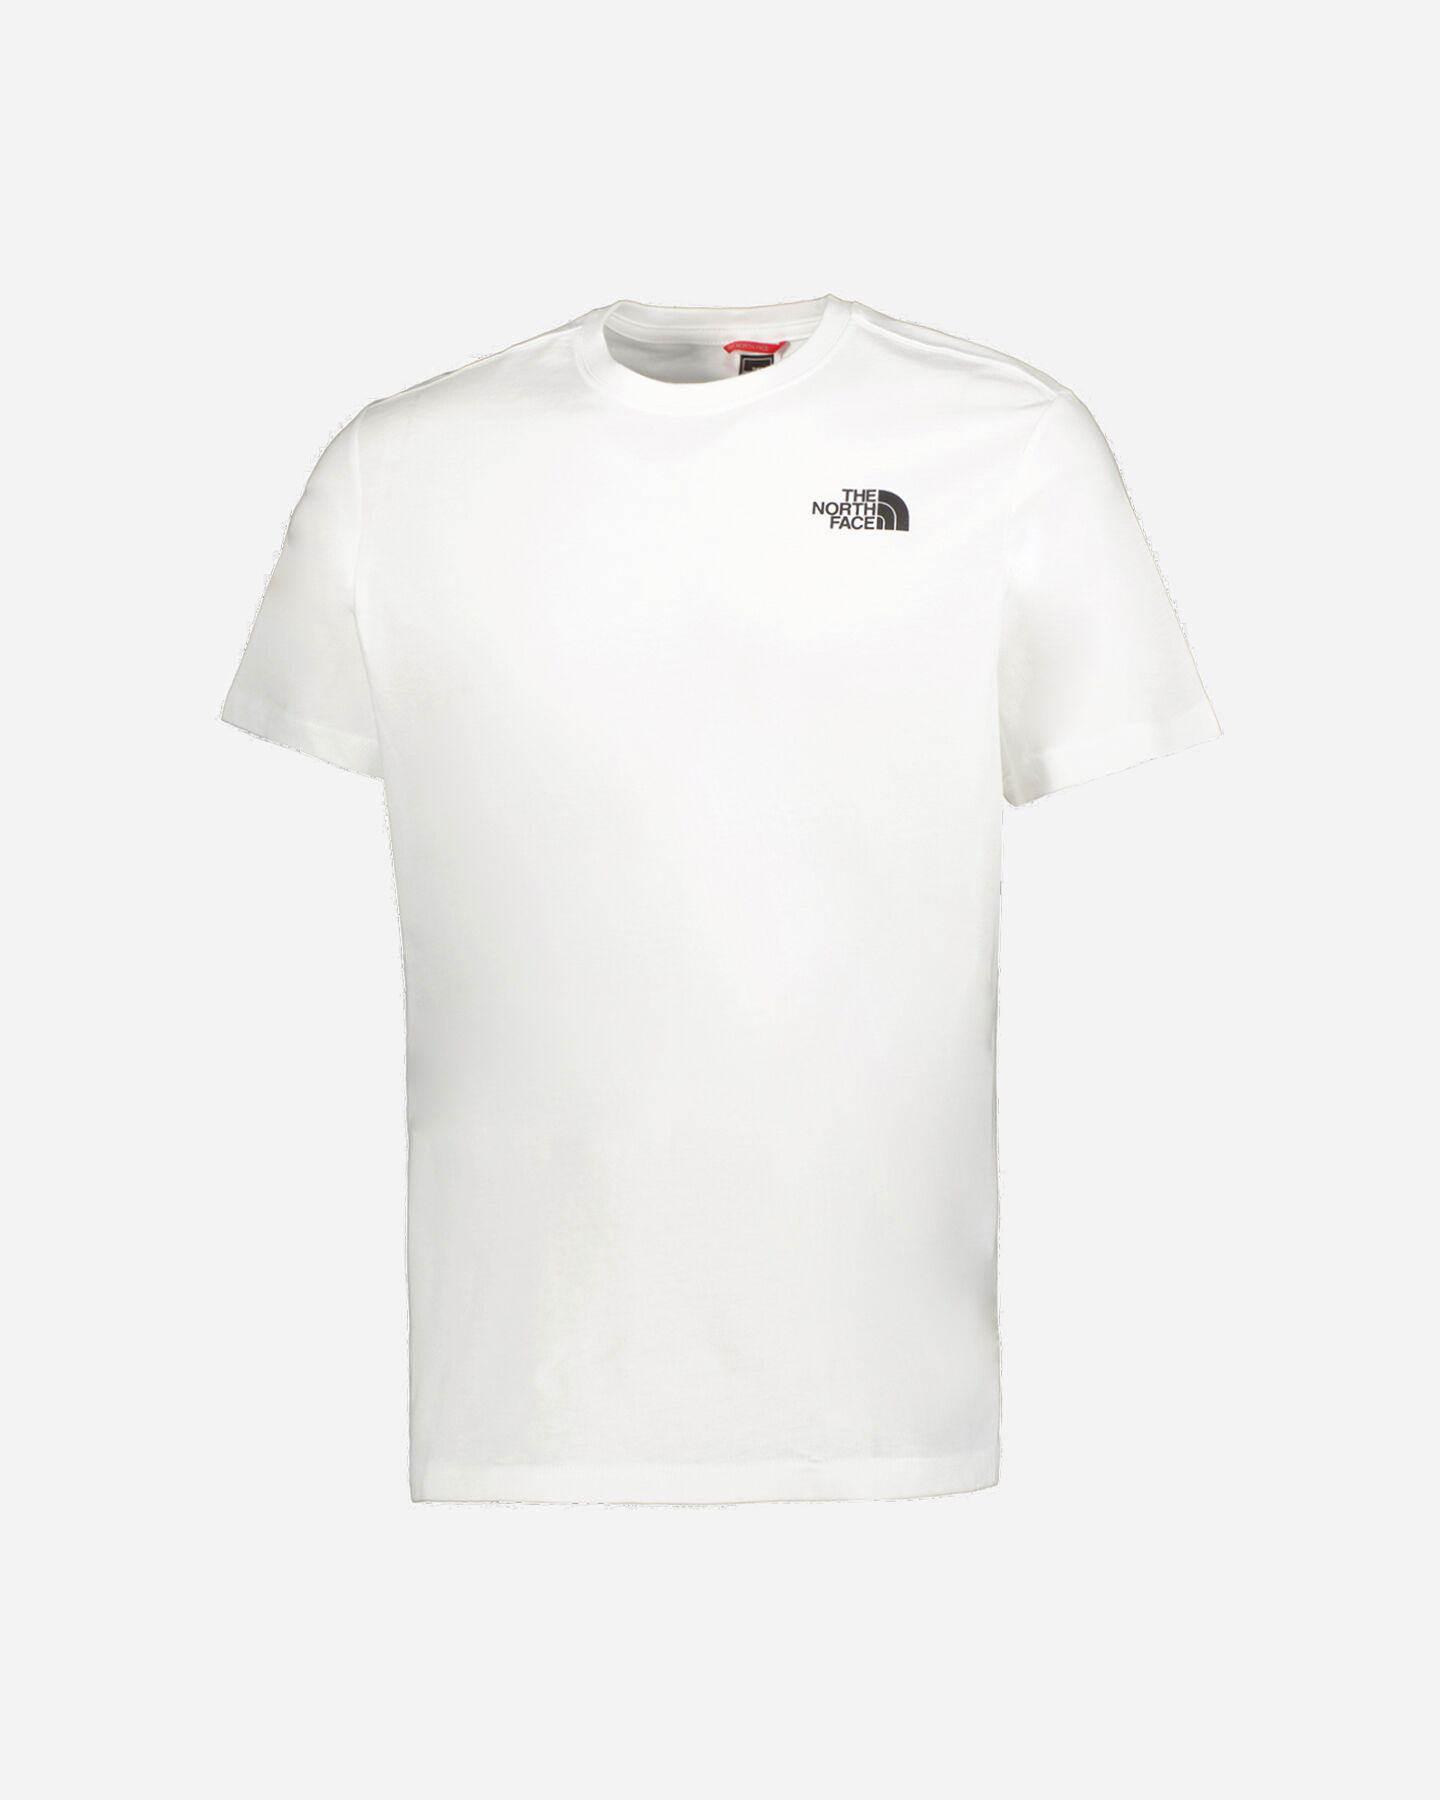  T-Shirt THE NORTH FACE REDBOX M S5015364|FN4|XXS scatto 0